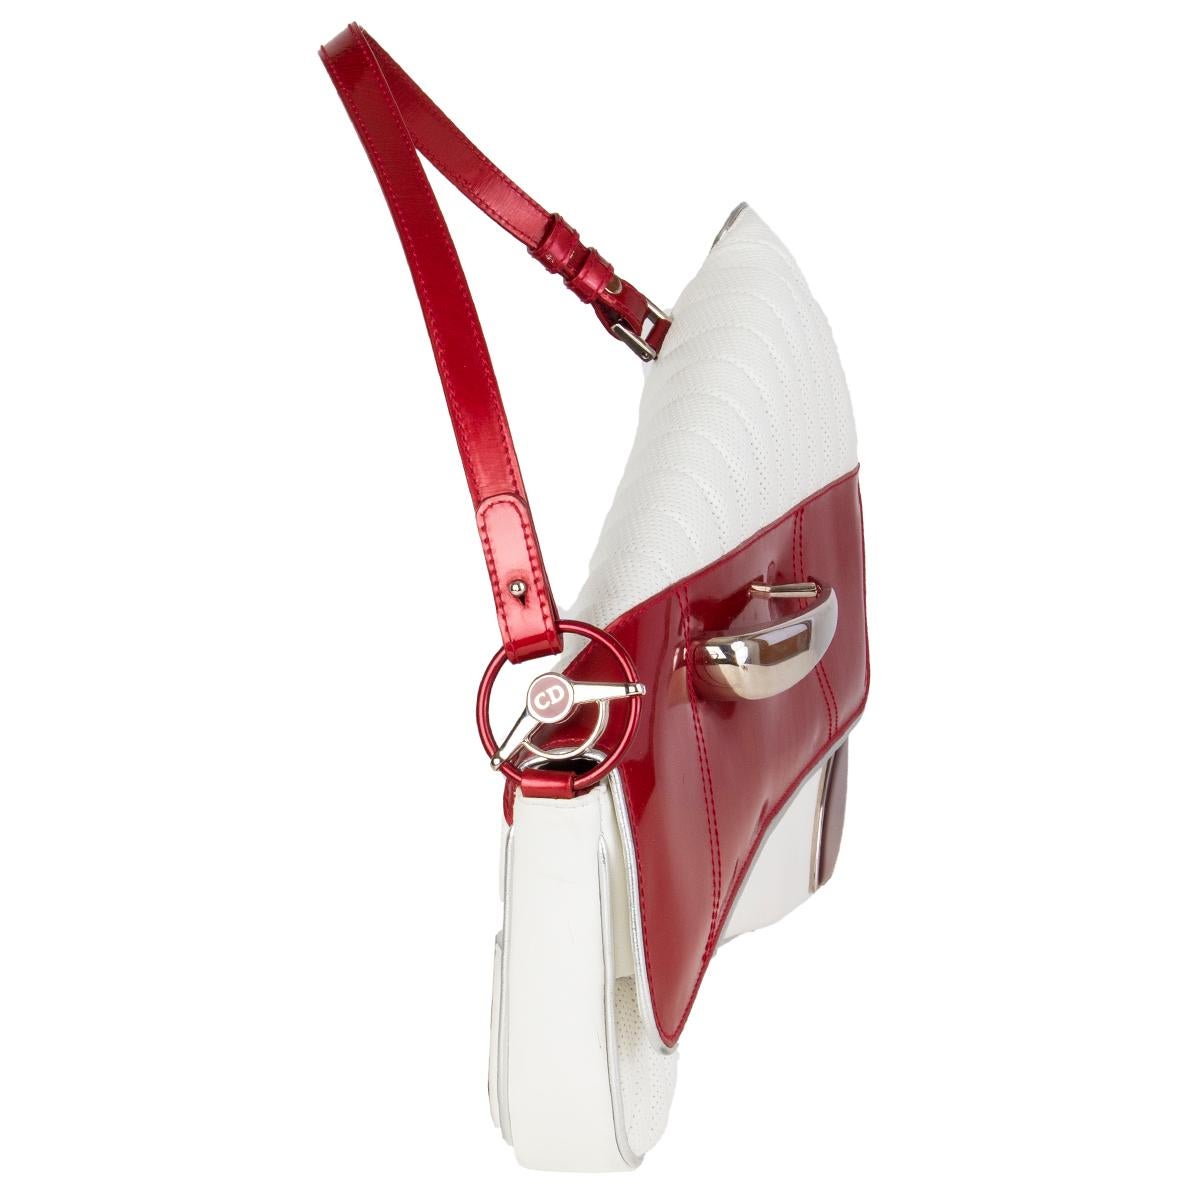 Christian Dior Vintage 'Cadillac' saddle bag in quilted white calfskin and a strawberry red patent leather featuring silver leather trim. Cadillac door handle flap and license plate on the back side. Extra zip pocket under the flap. Opens with a